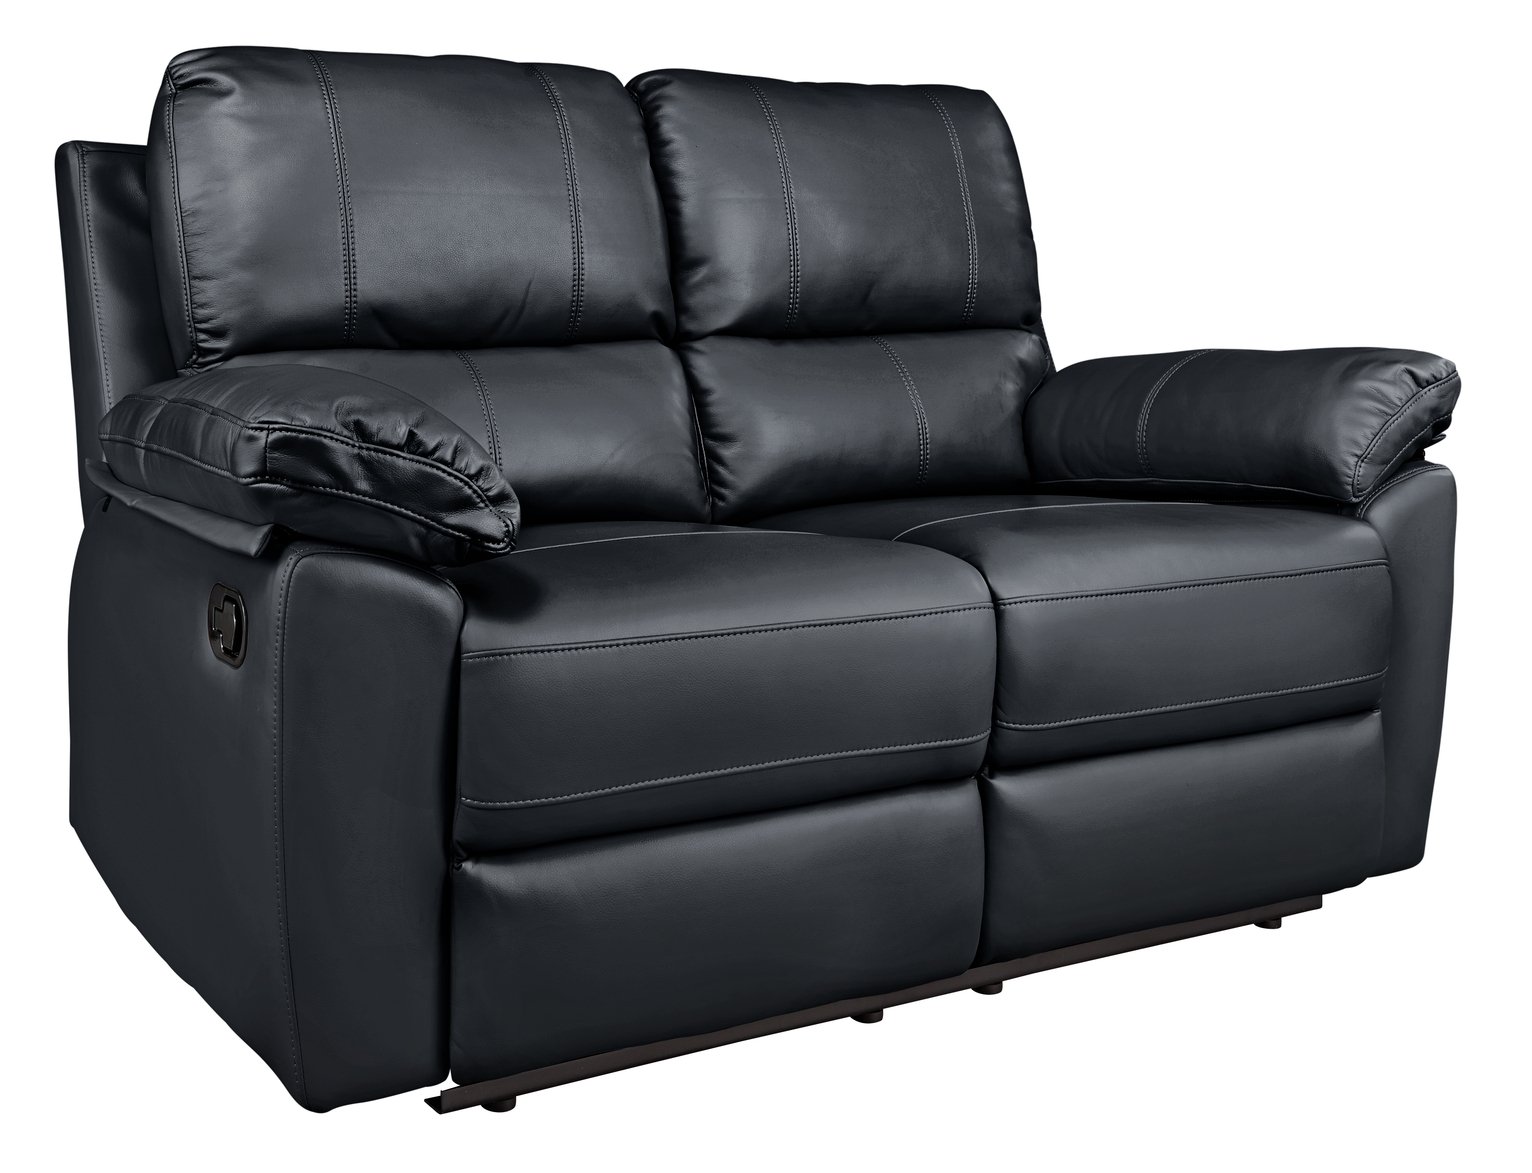 Buy Argos Home Toby 2 Seater Faux Leather Recliner Sofa - Black | Sofas ...